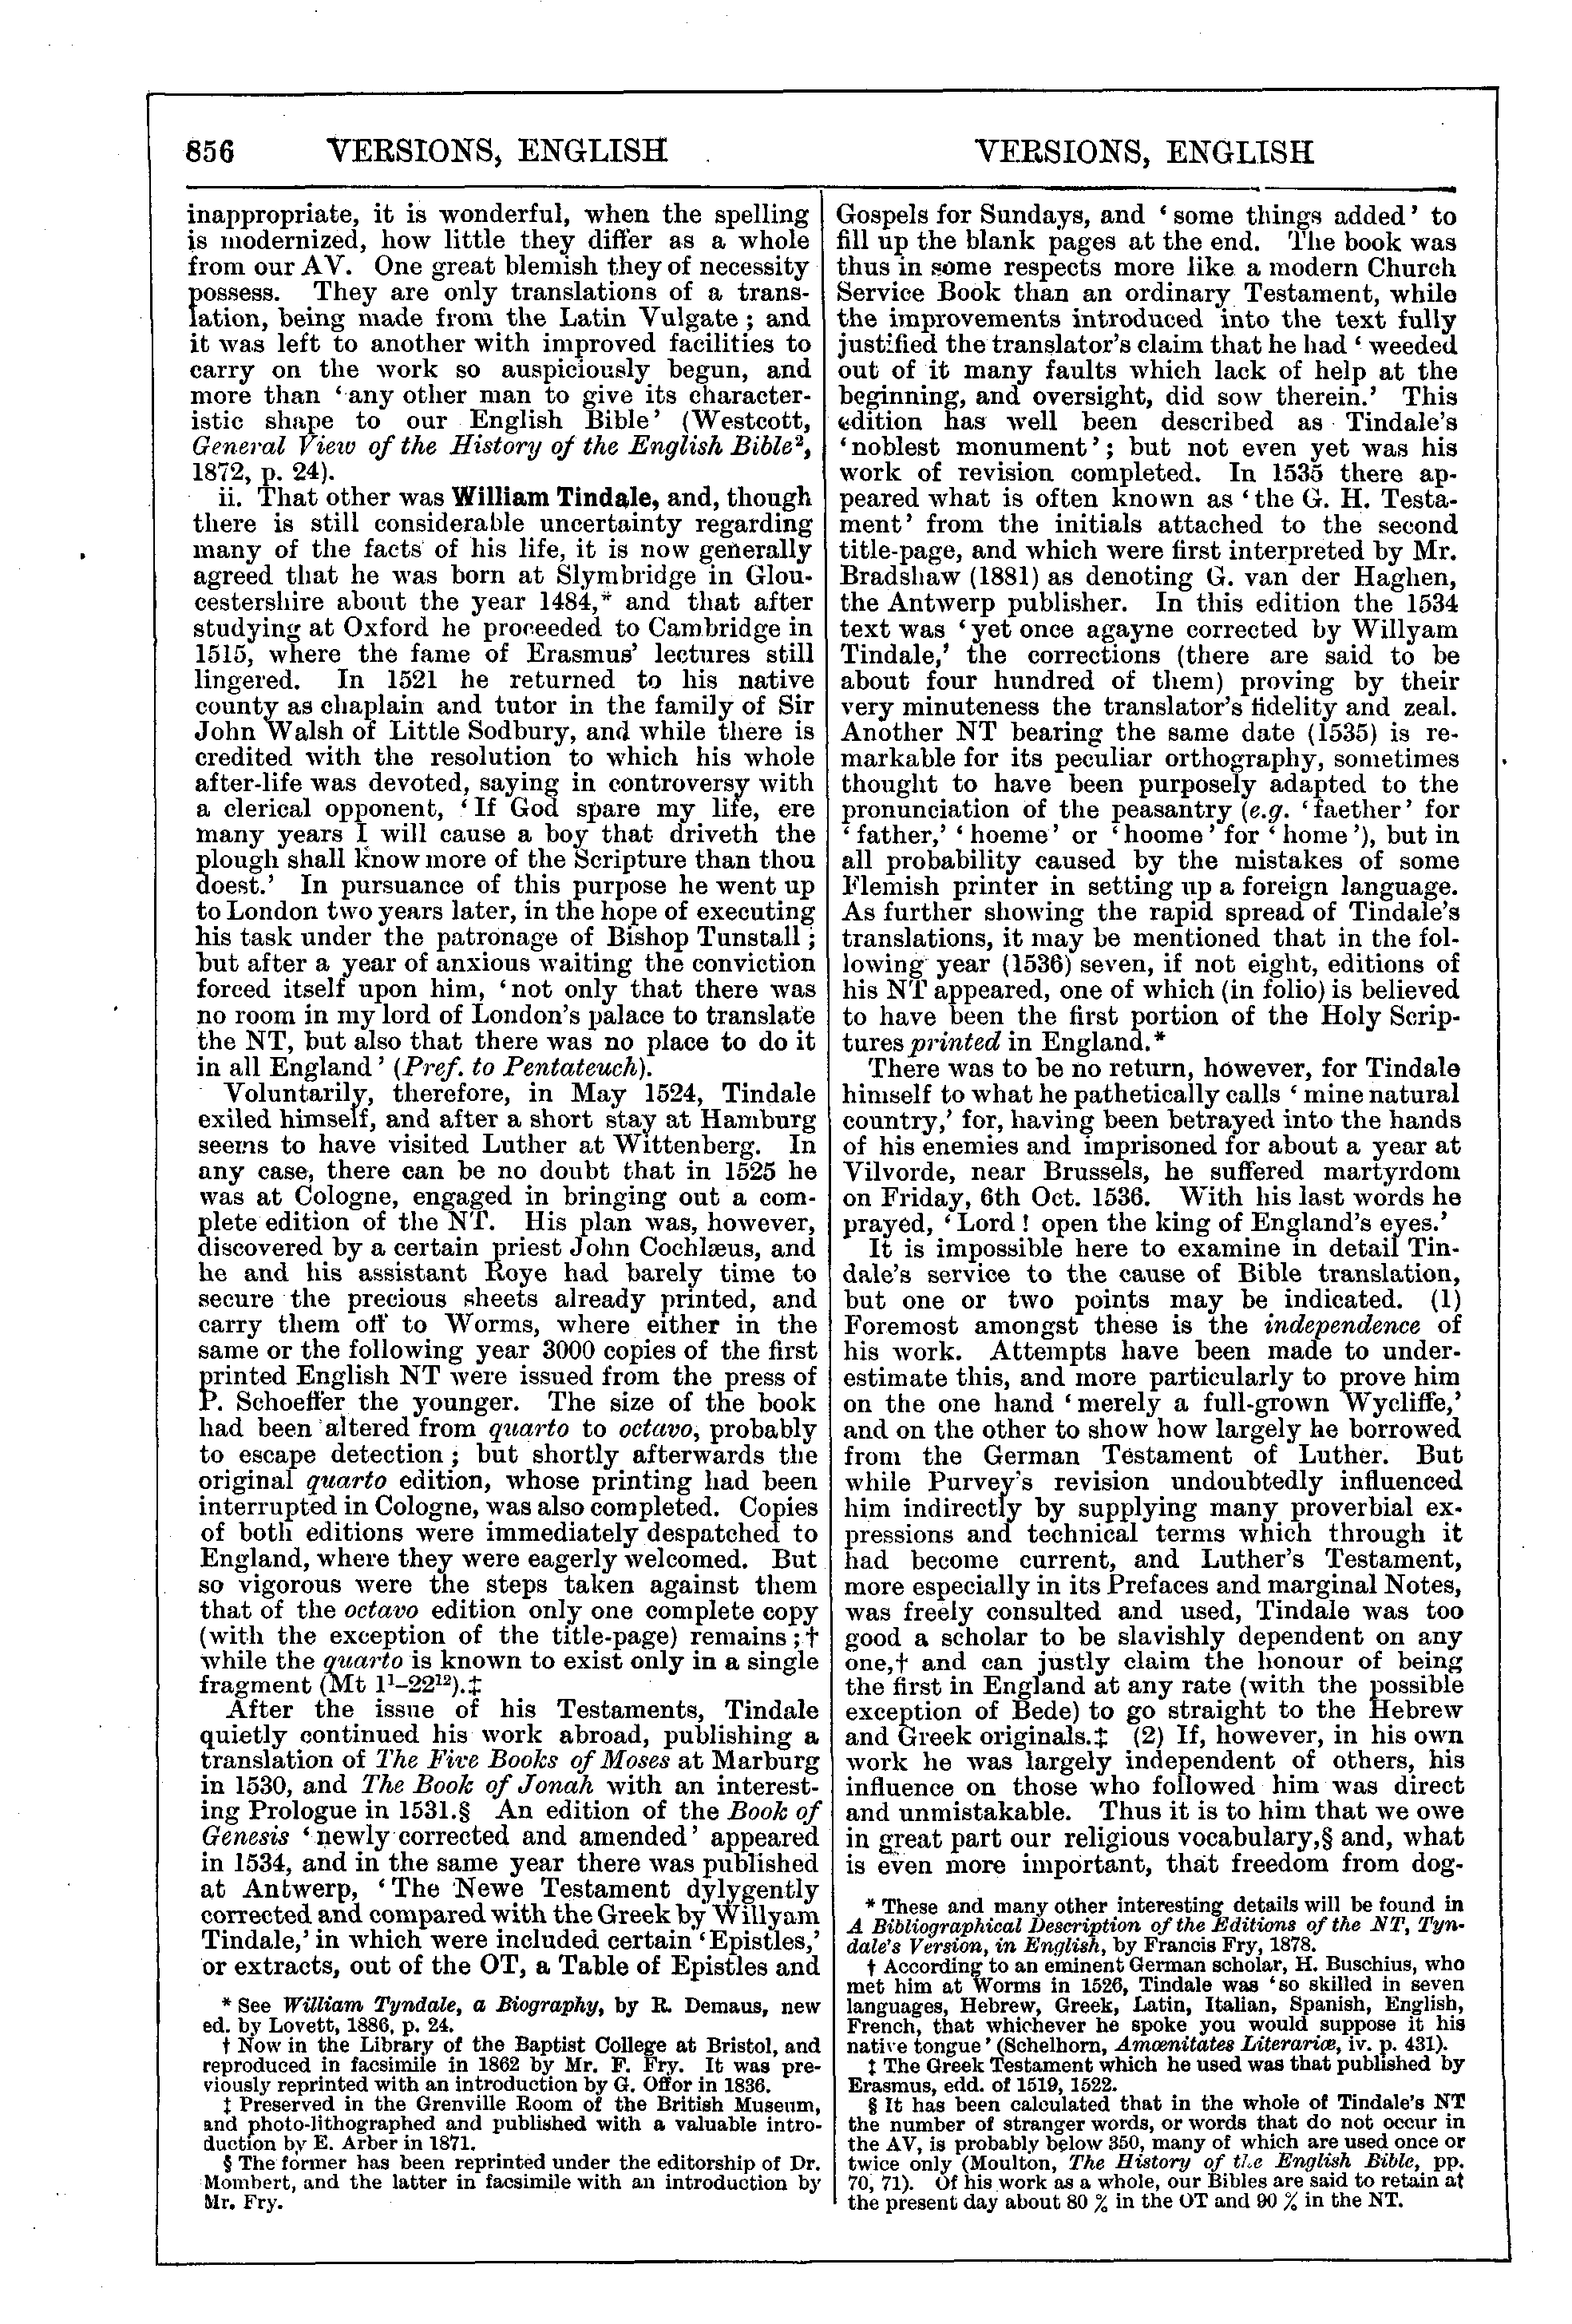 Image of page 856